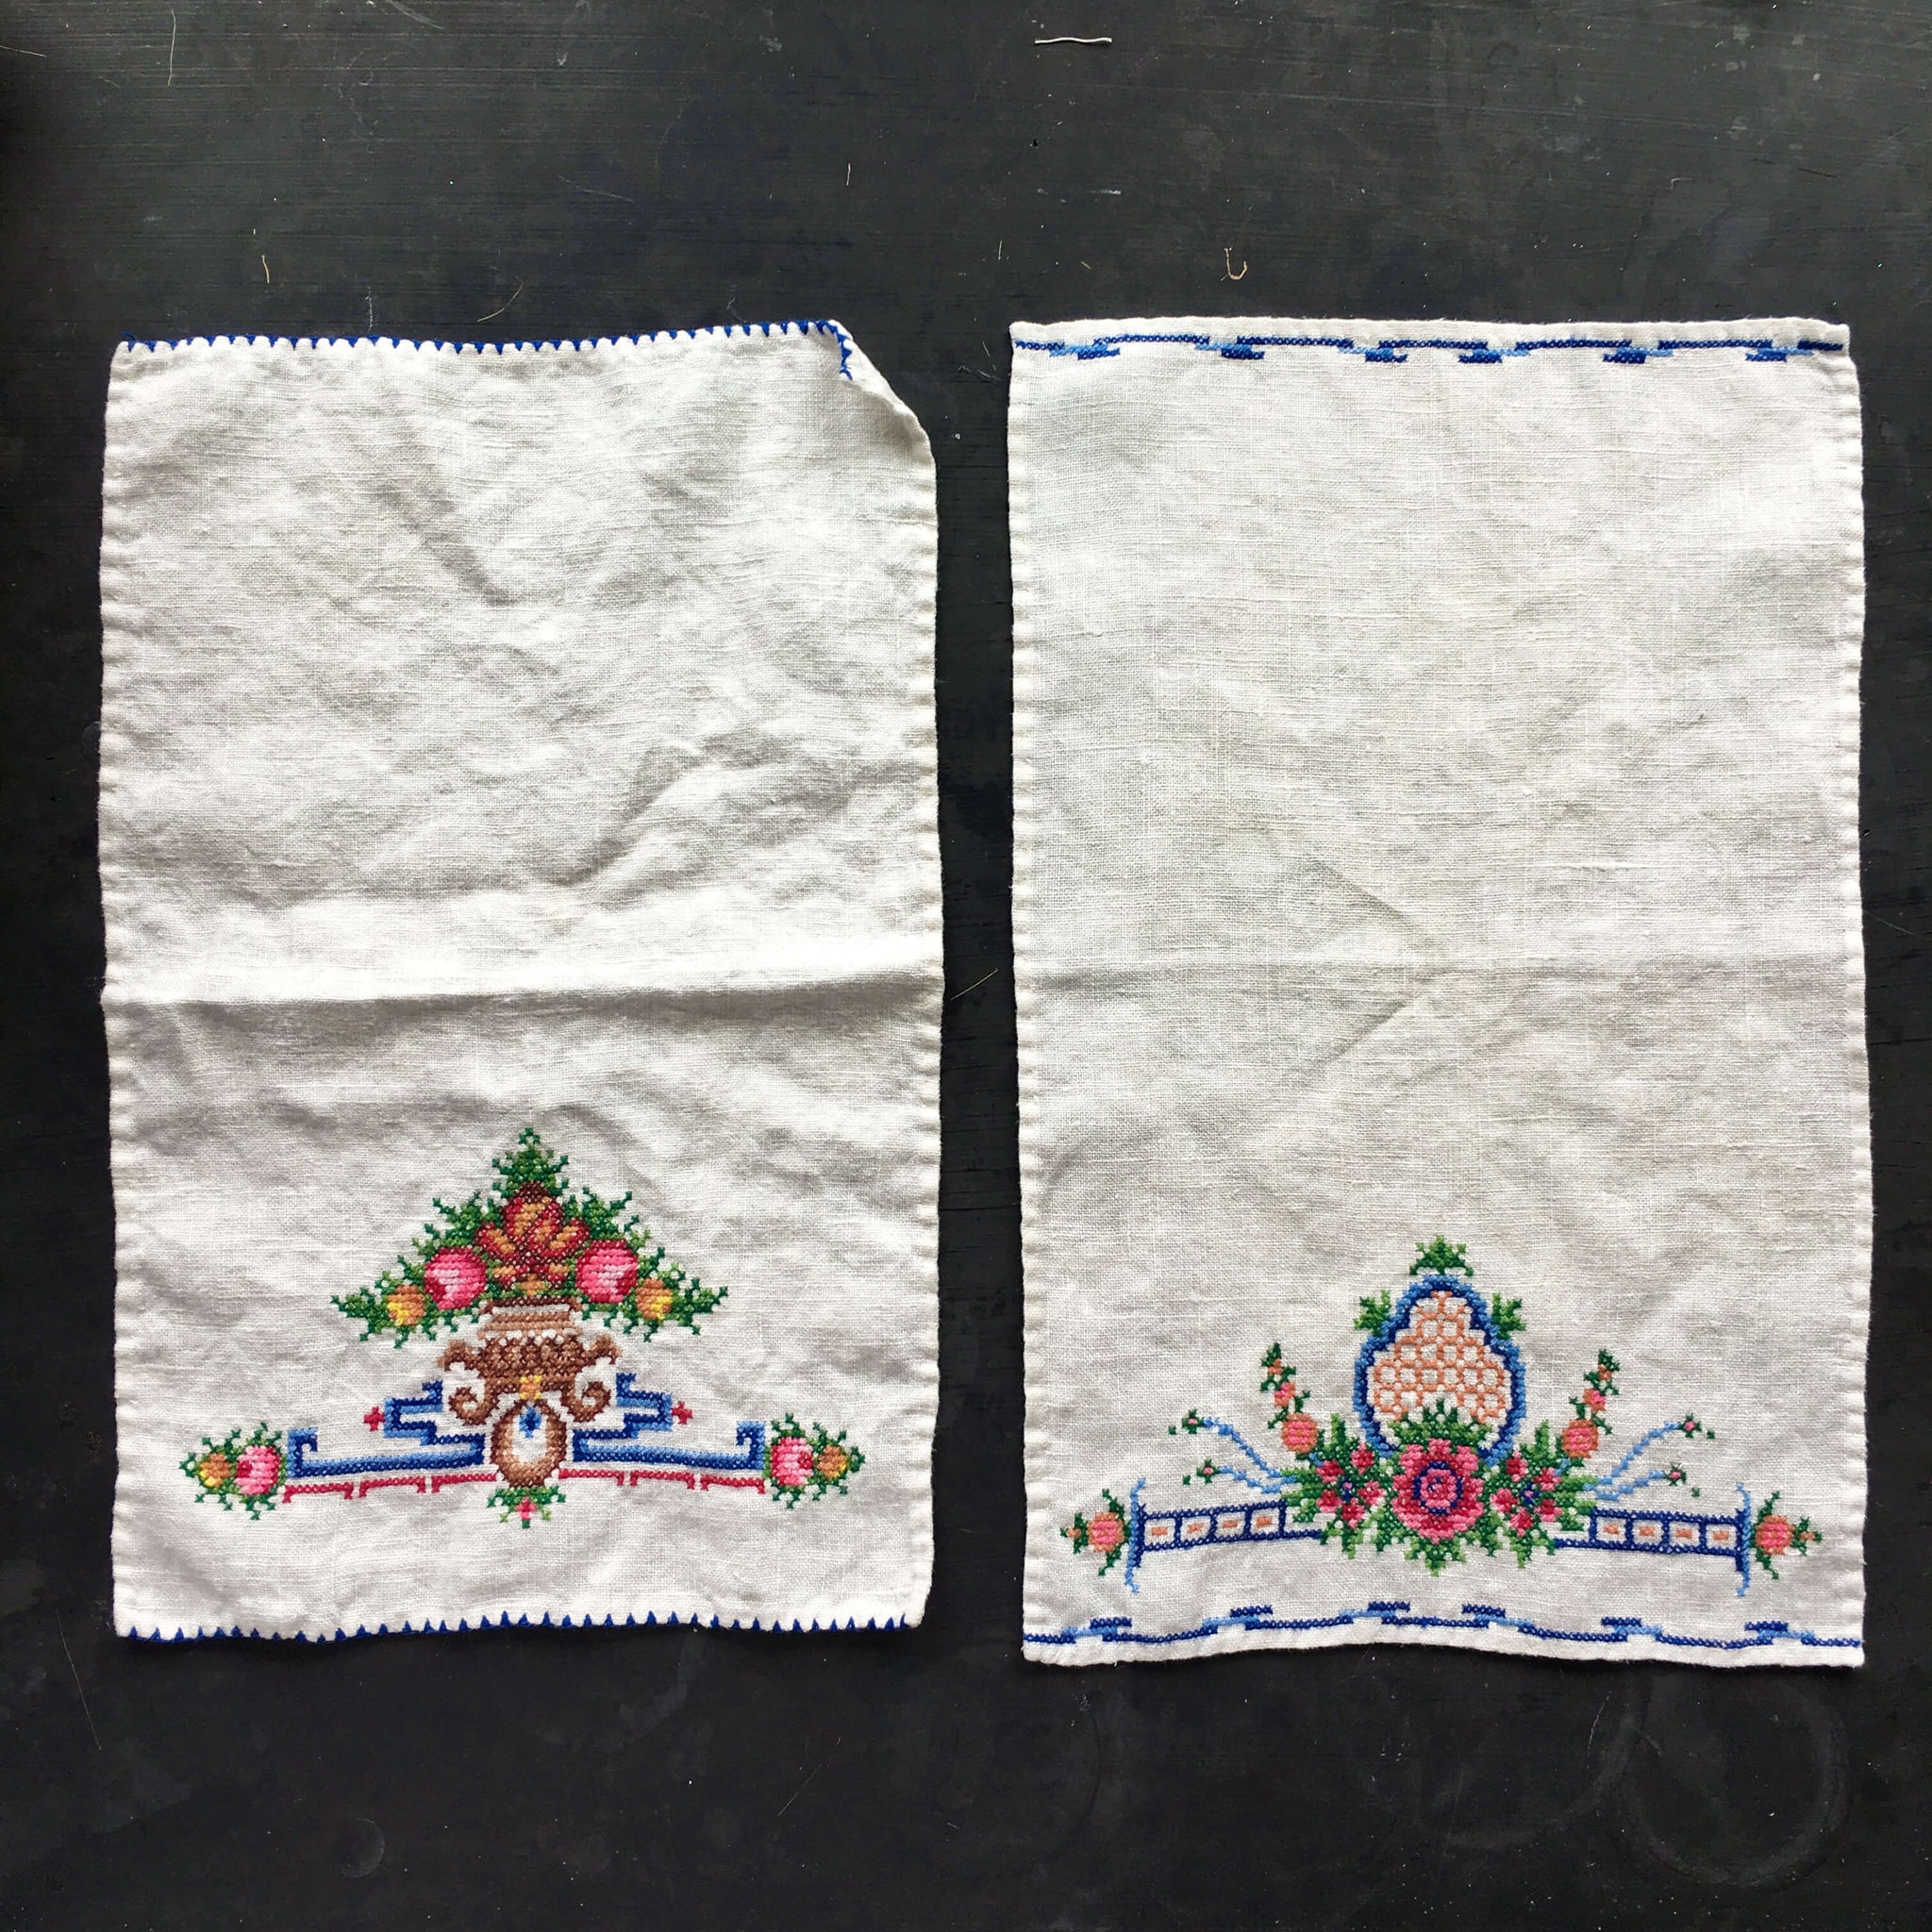 Vintage Cross Stitch Embroidery Kitchen Towels - Set of Two - Colorful Florals